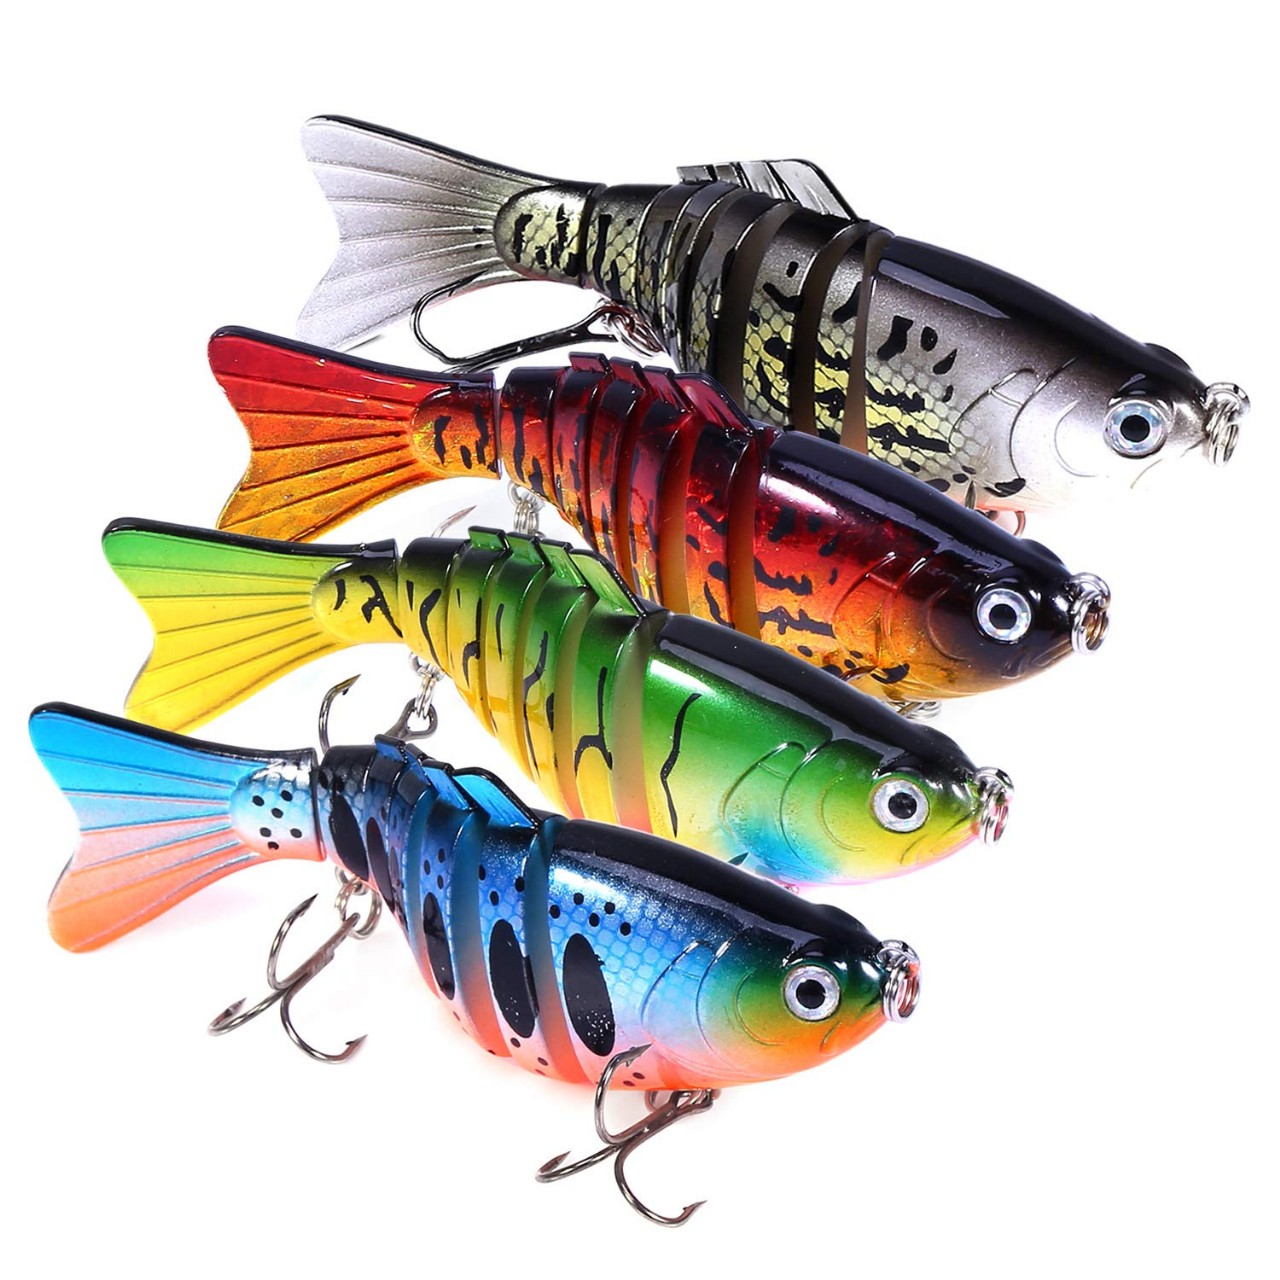 PLUSINNO Bass Fishing Lures, Swim Baits Lures for Bass, 4